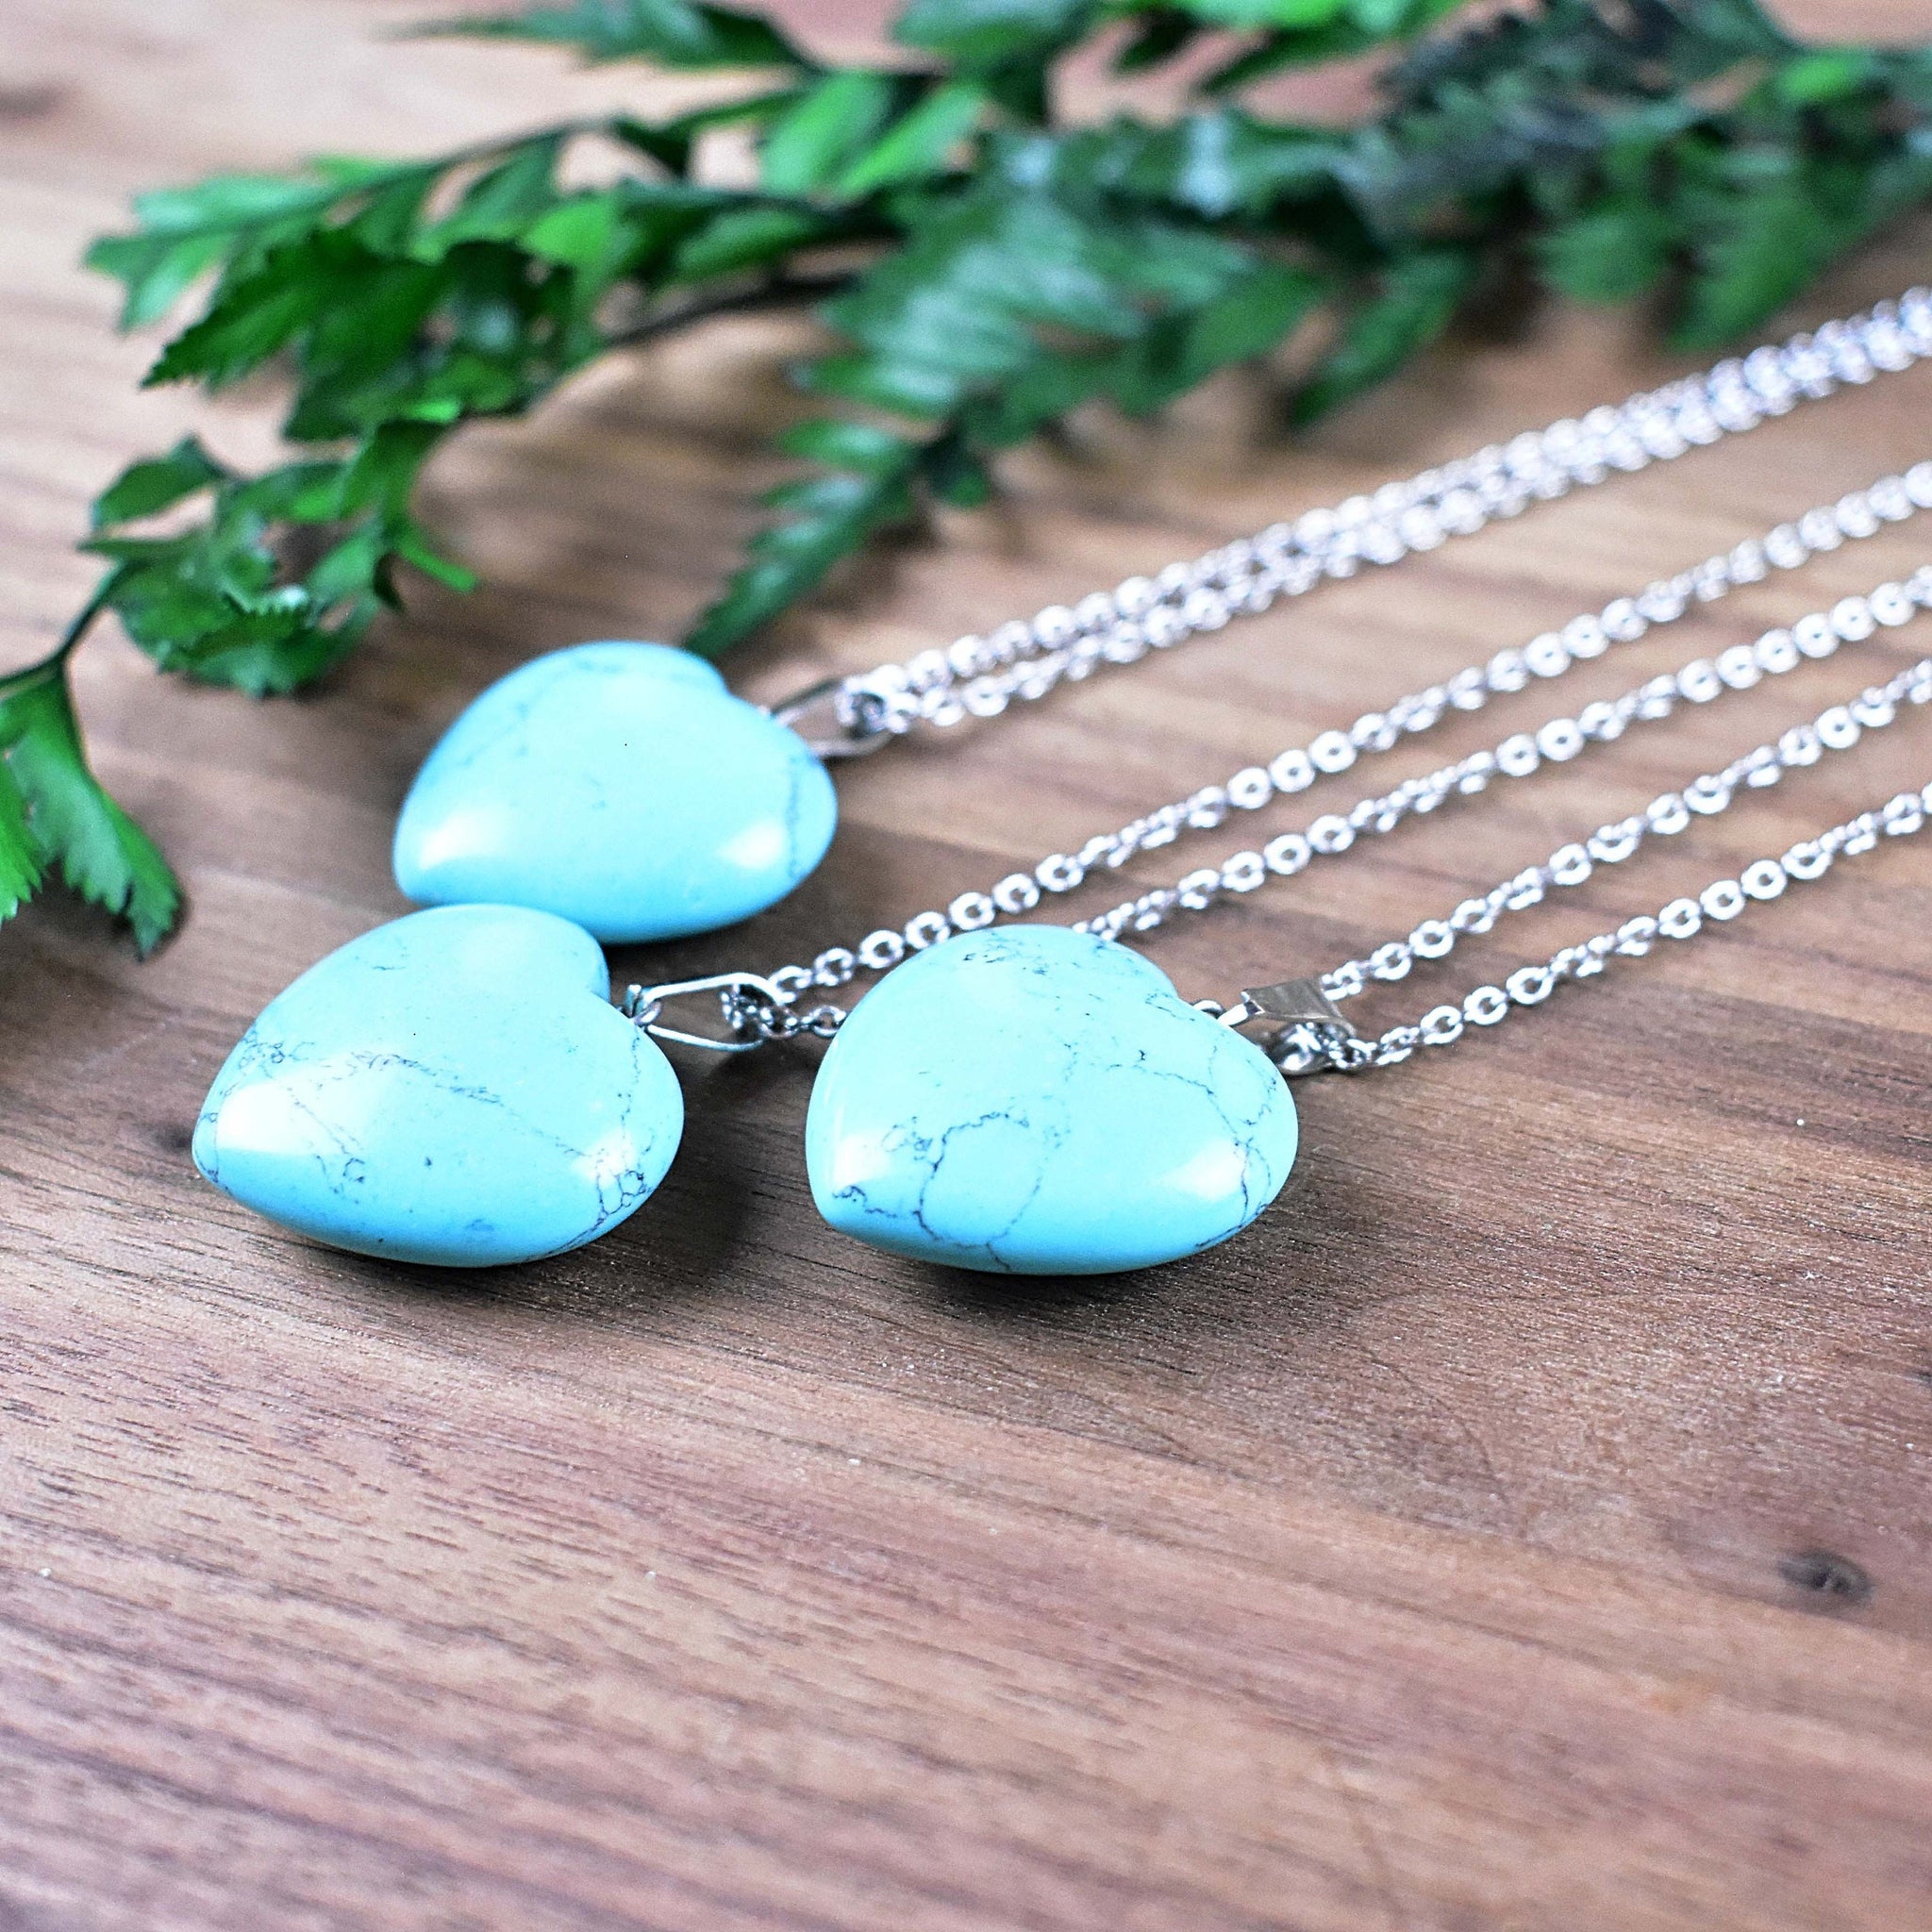 Natural Raw Turquoise Stone Blue Gemstone Pendant Necklace Gold Chain